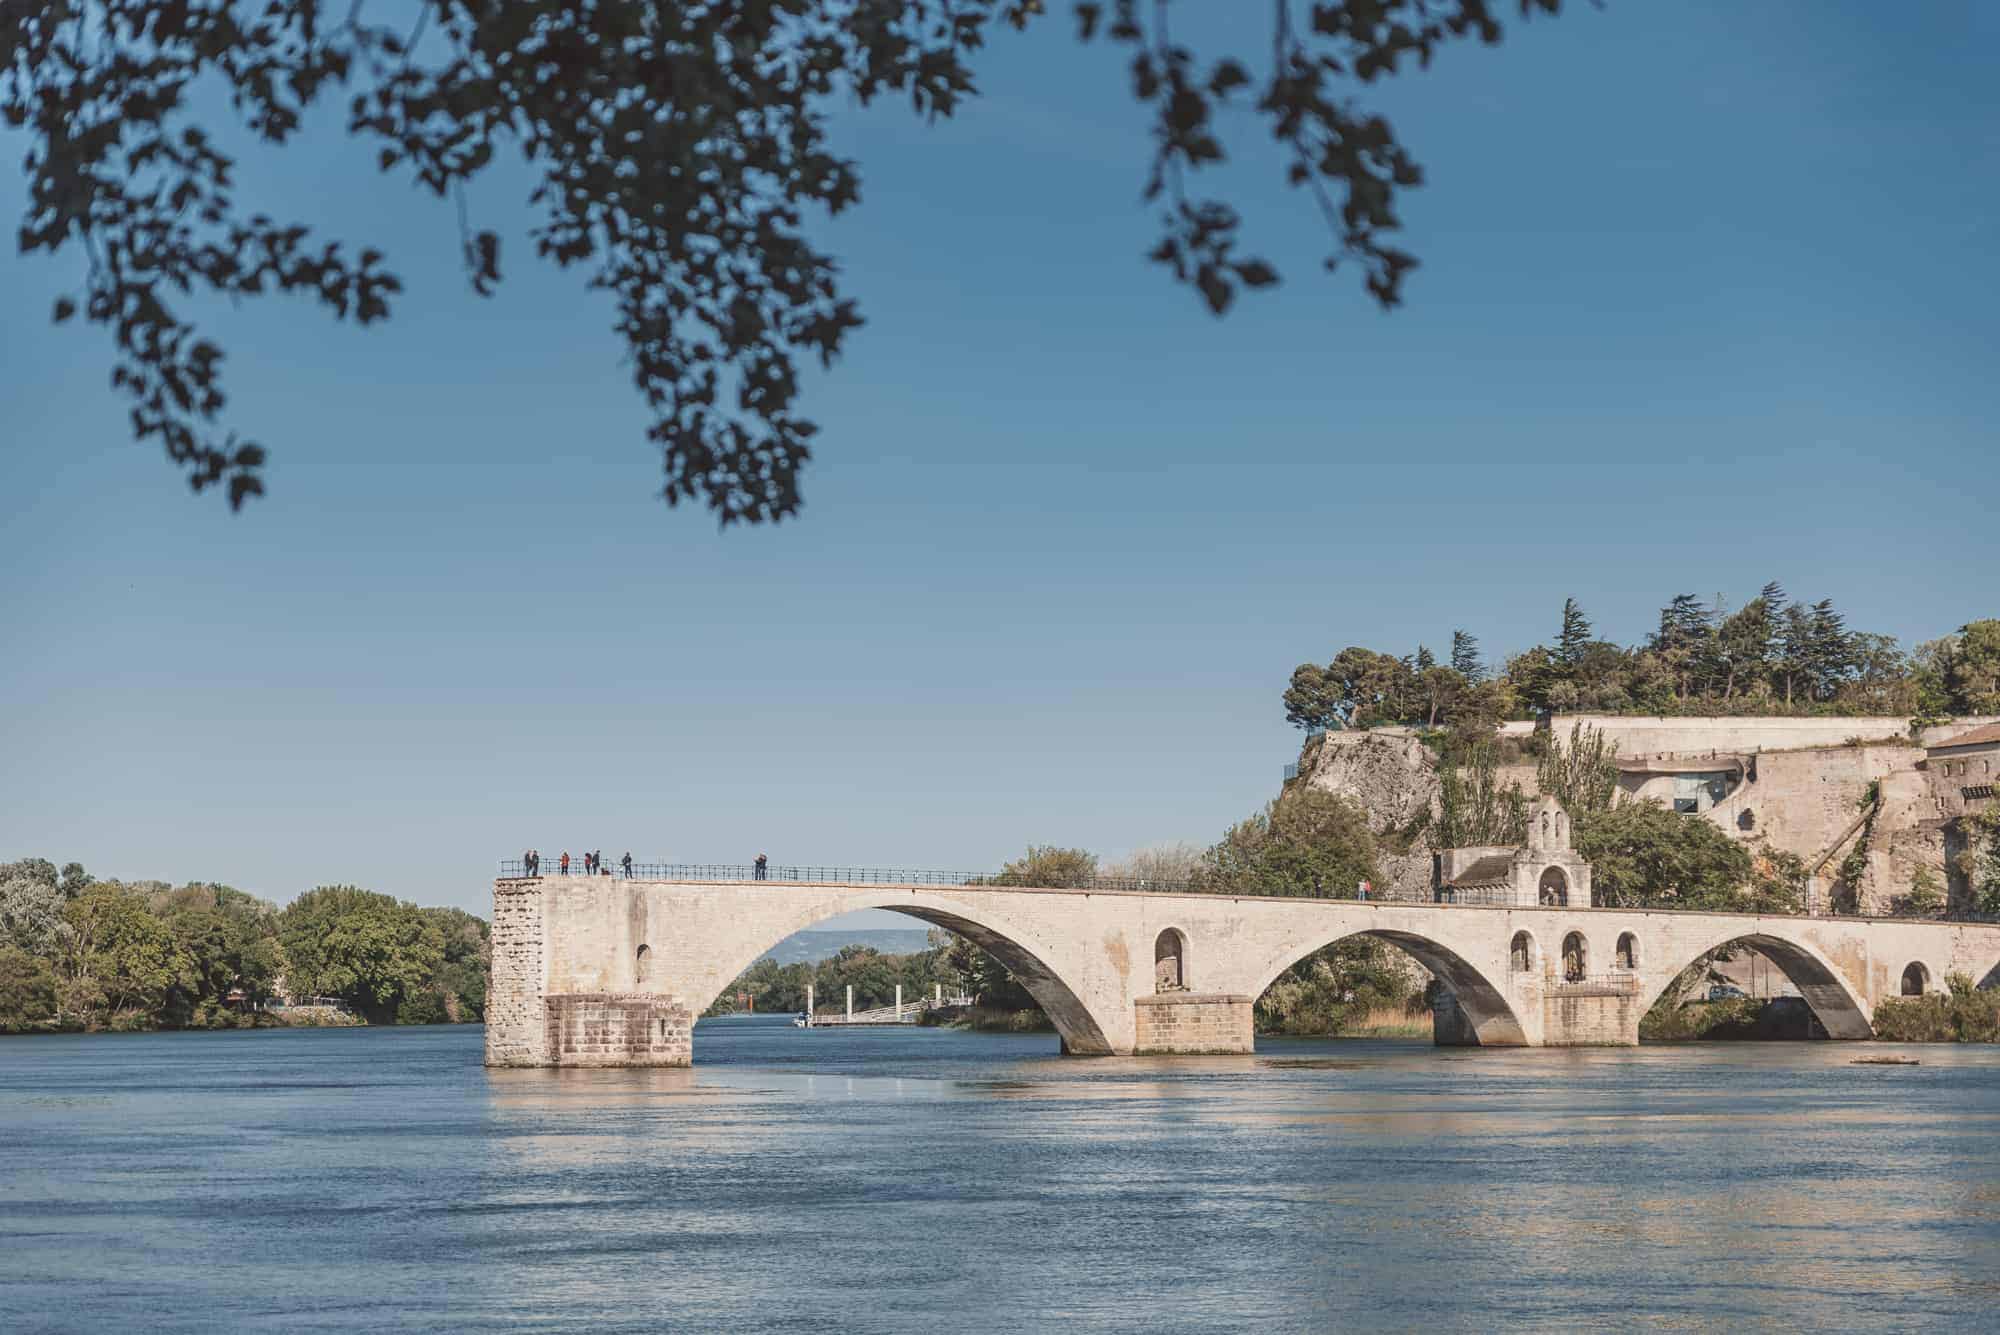 Top 10 Things to do in Avignon, France